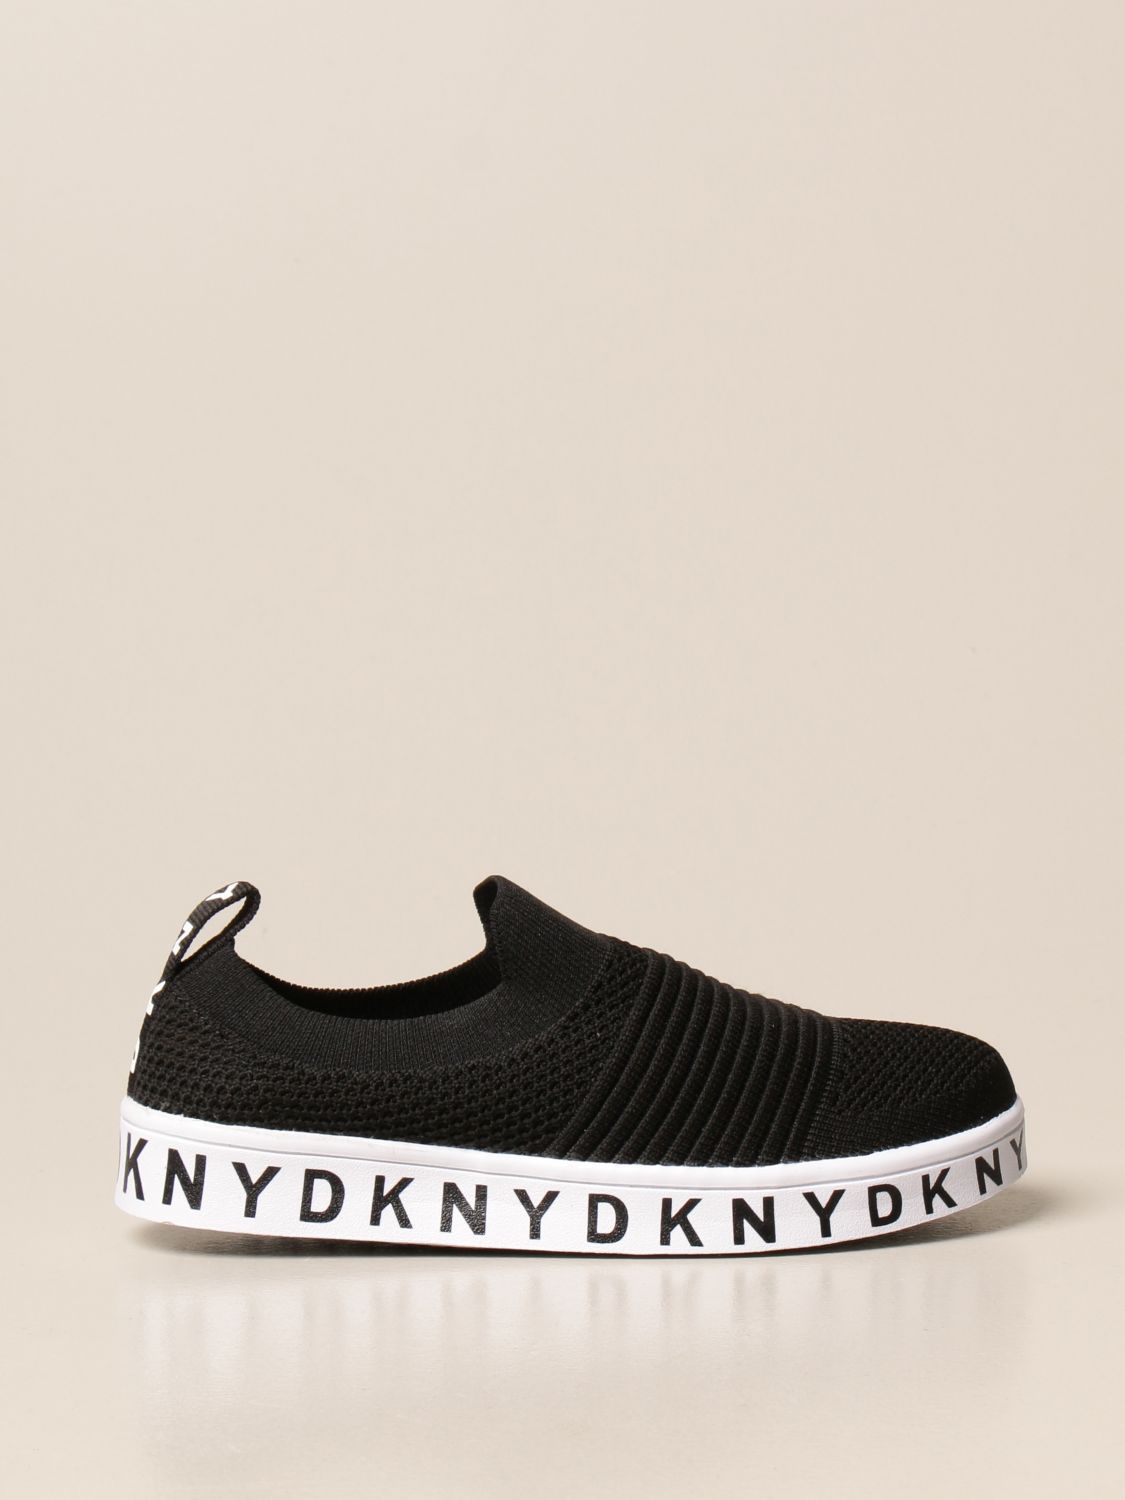 Buy > dkny girls shoes > in stock